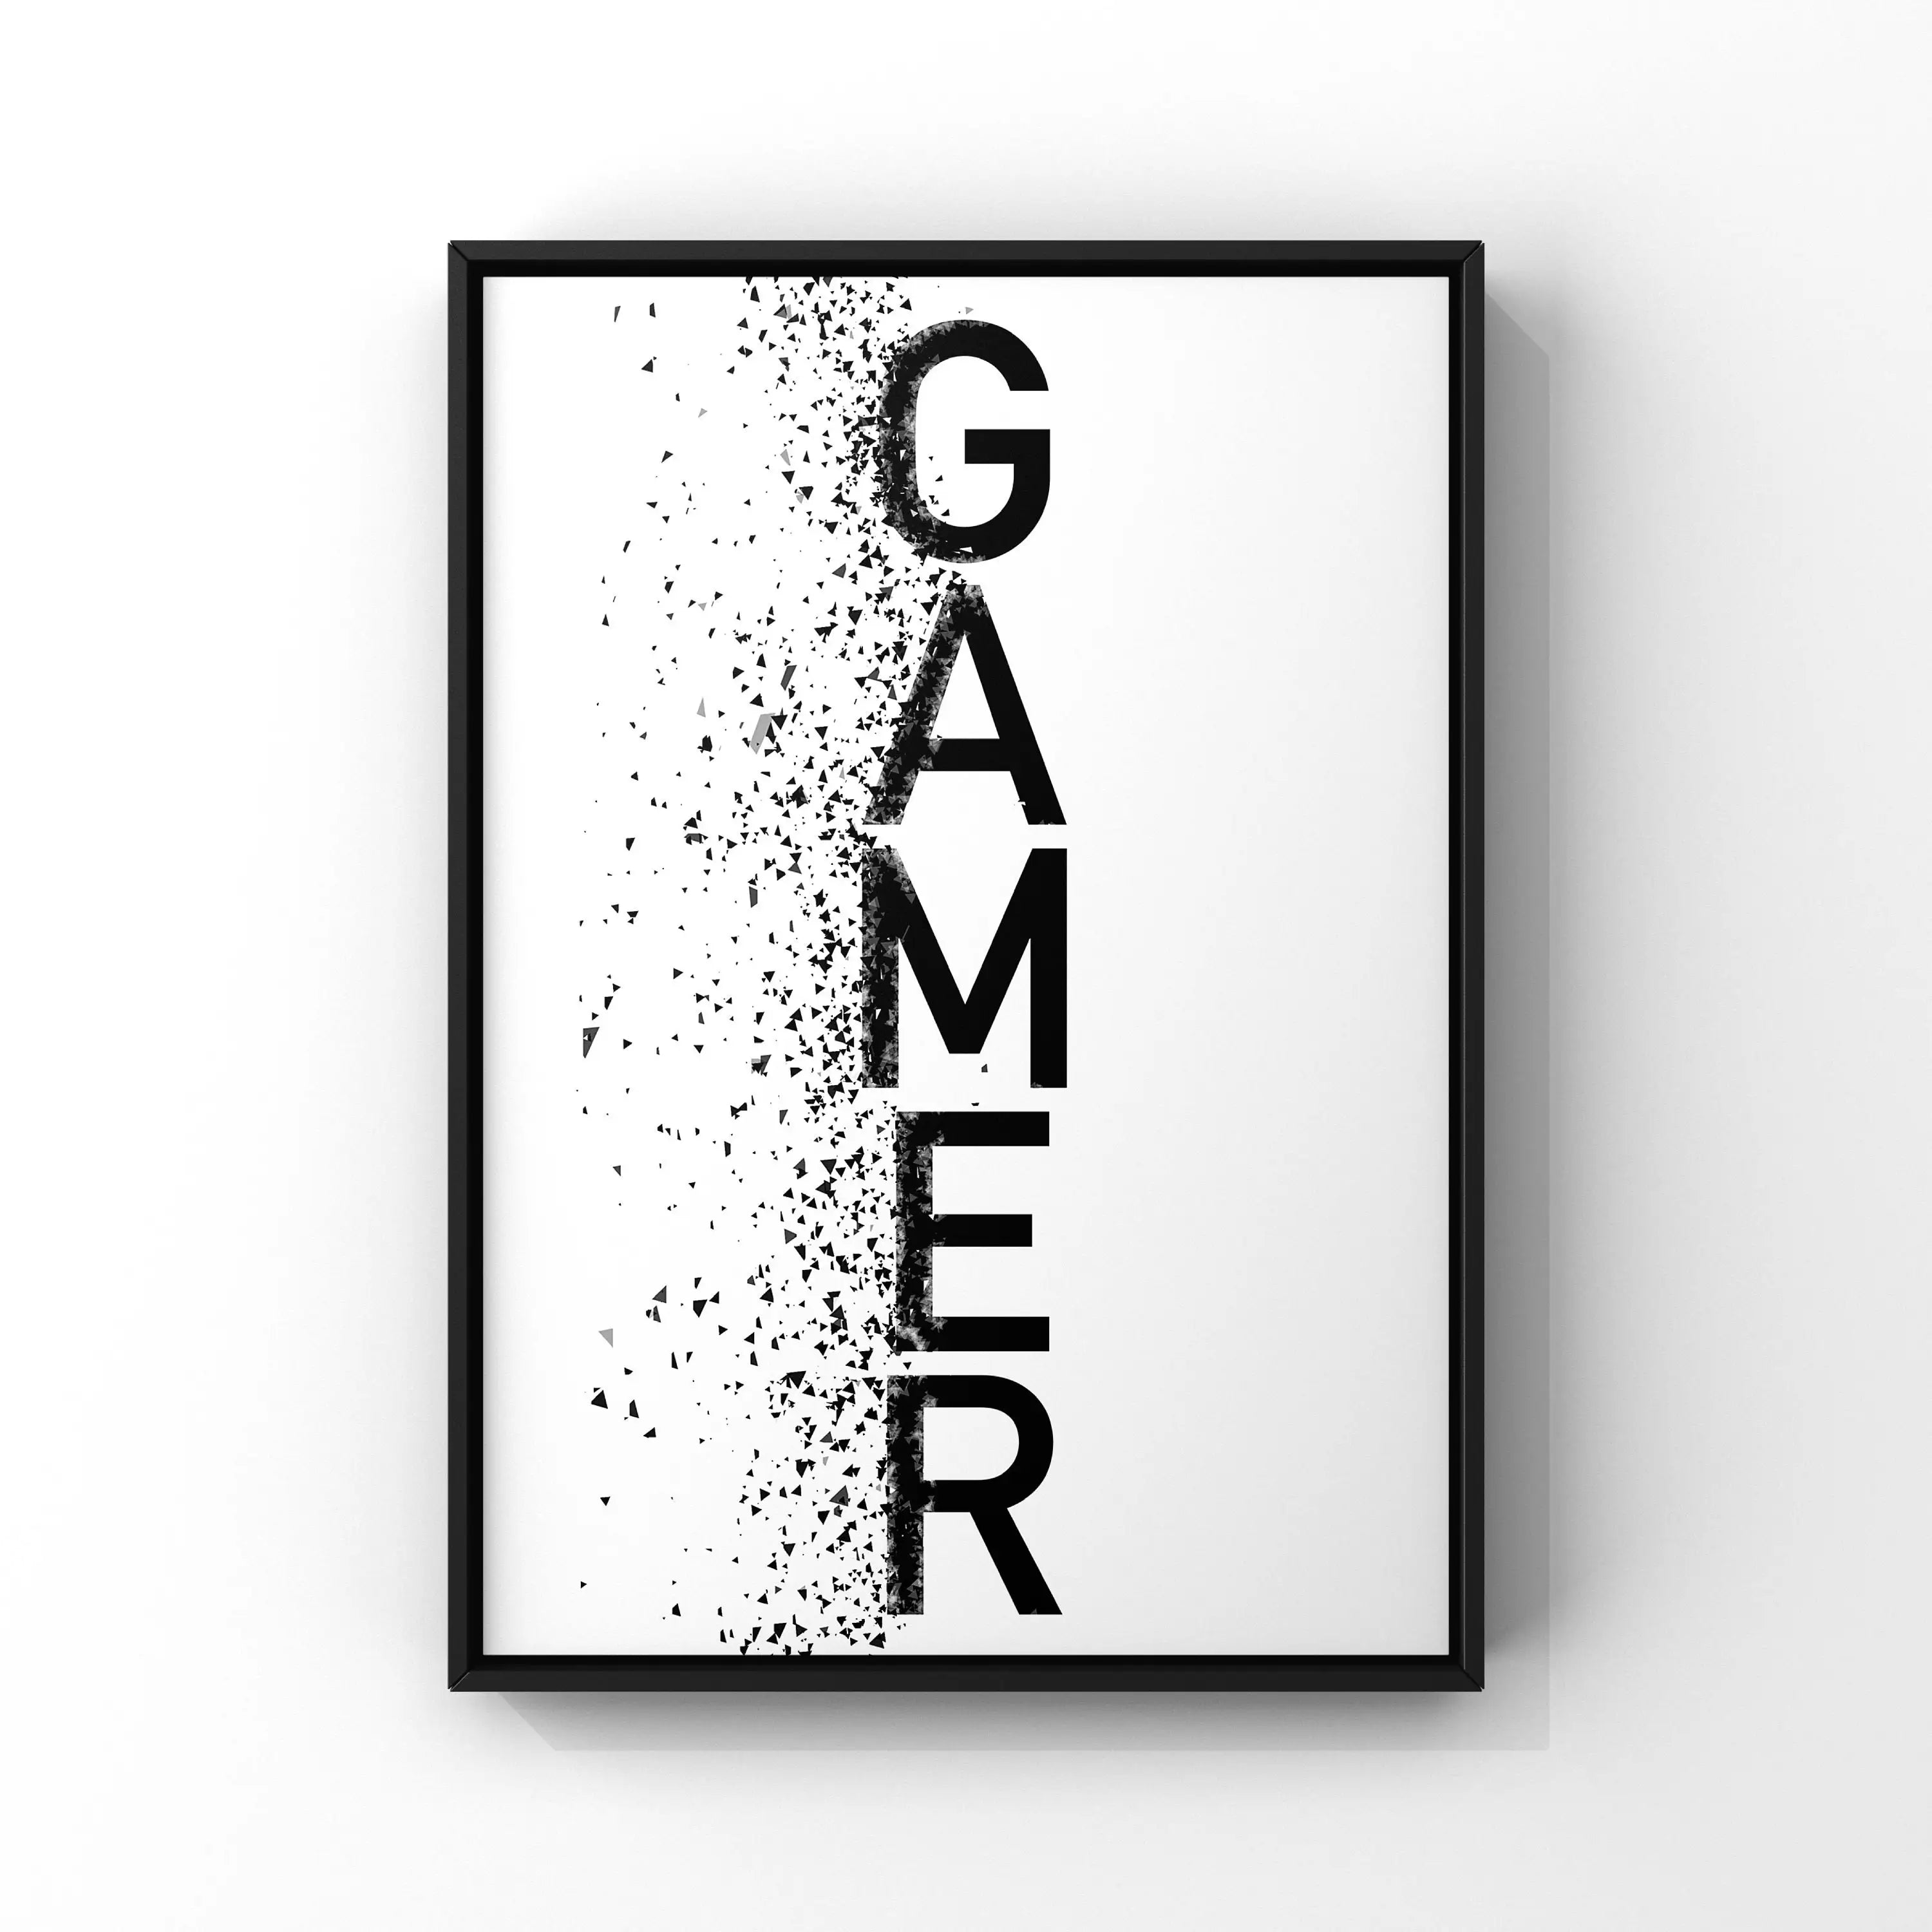 Black & White Gamer Posters Minimalist Wall Art Fine Art Canvas Prints Trendy Pictures For Kid's Room Gamers Room Wall Art Decor